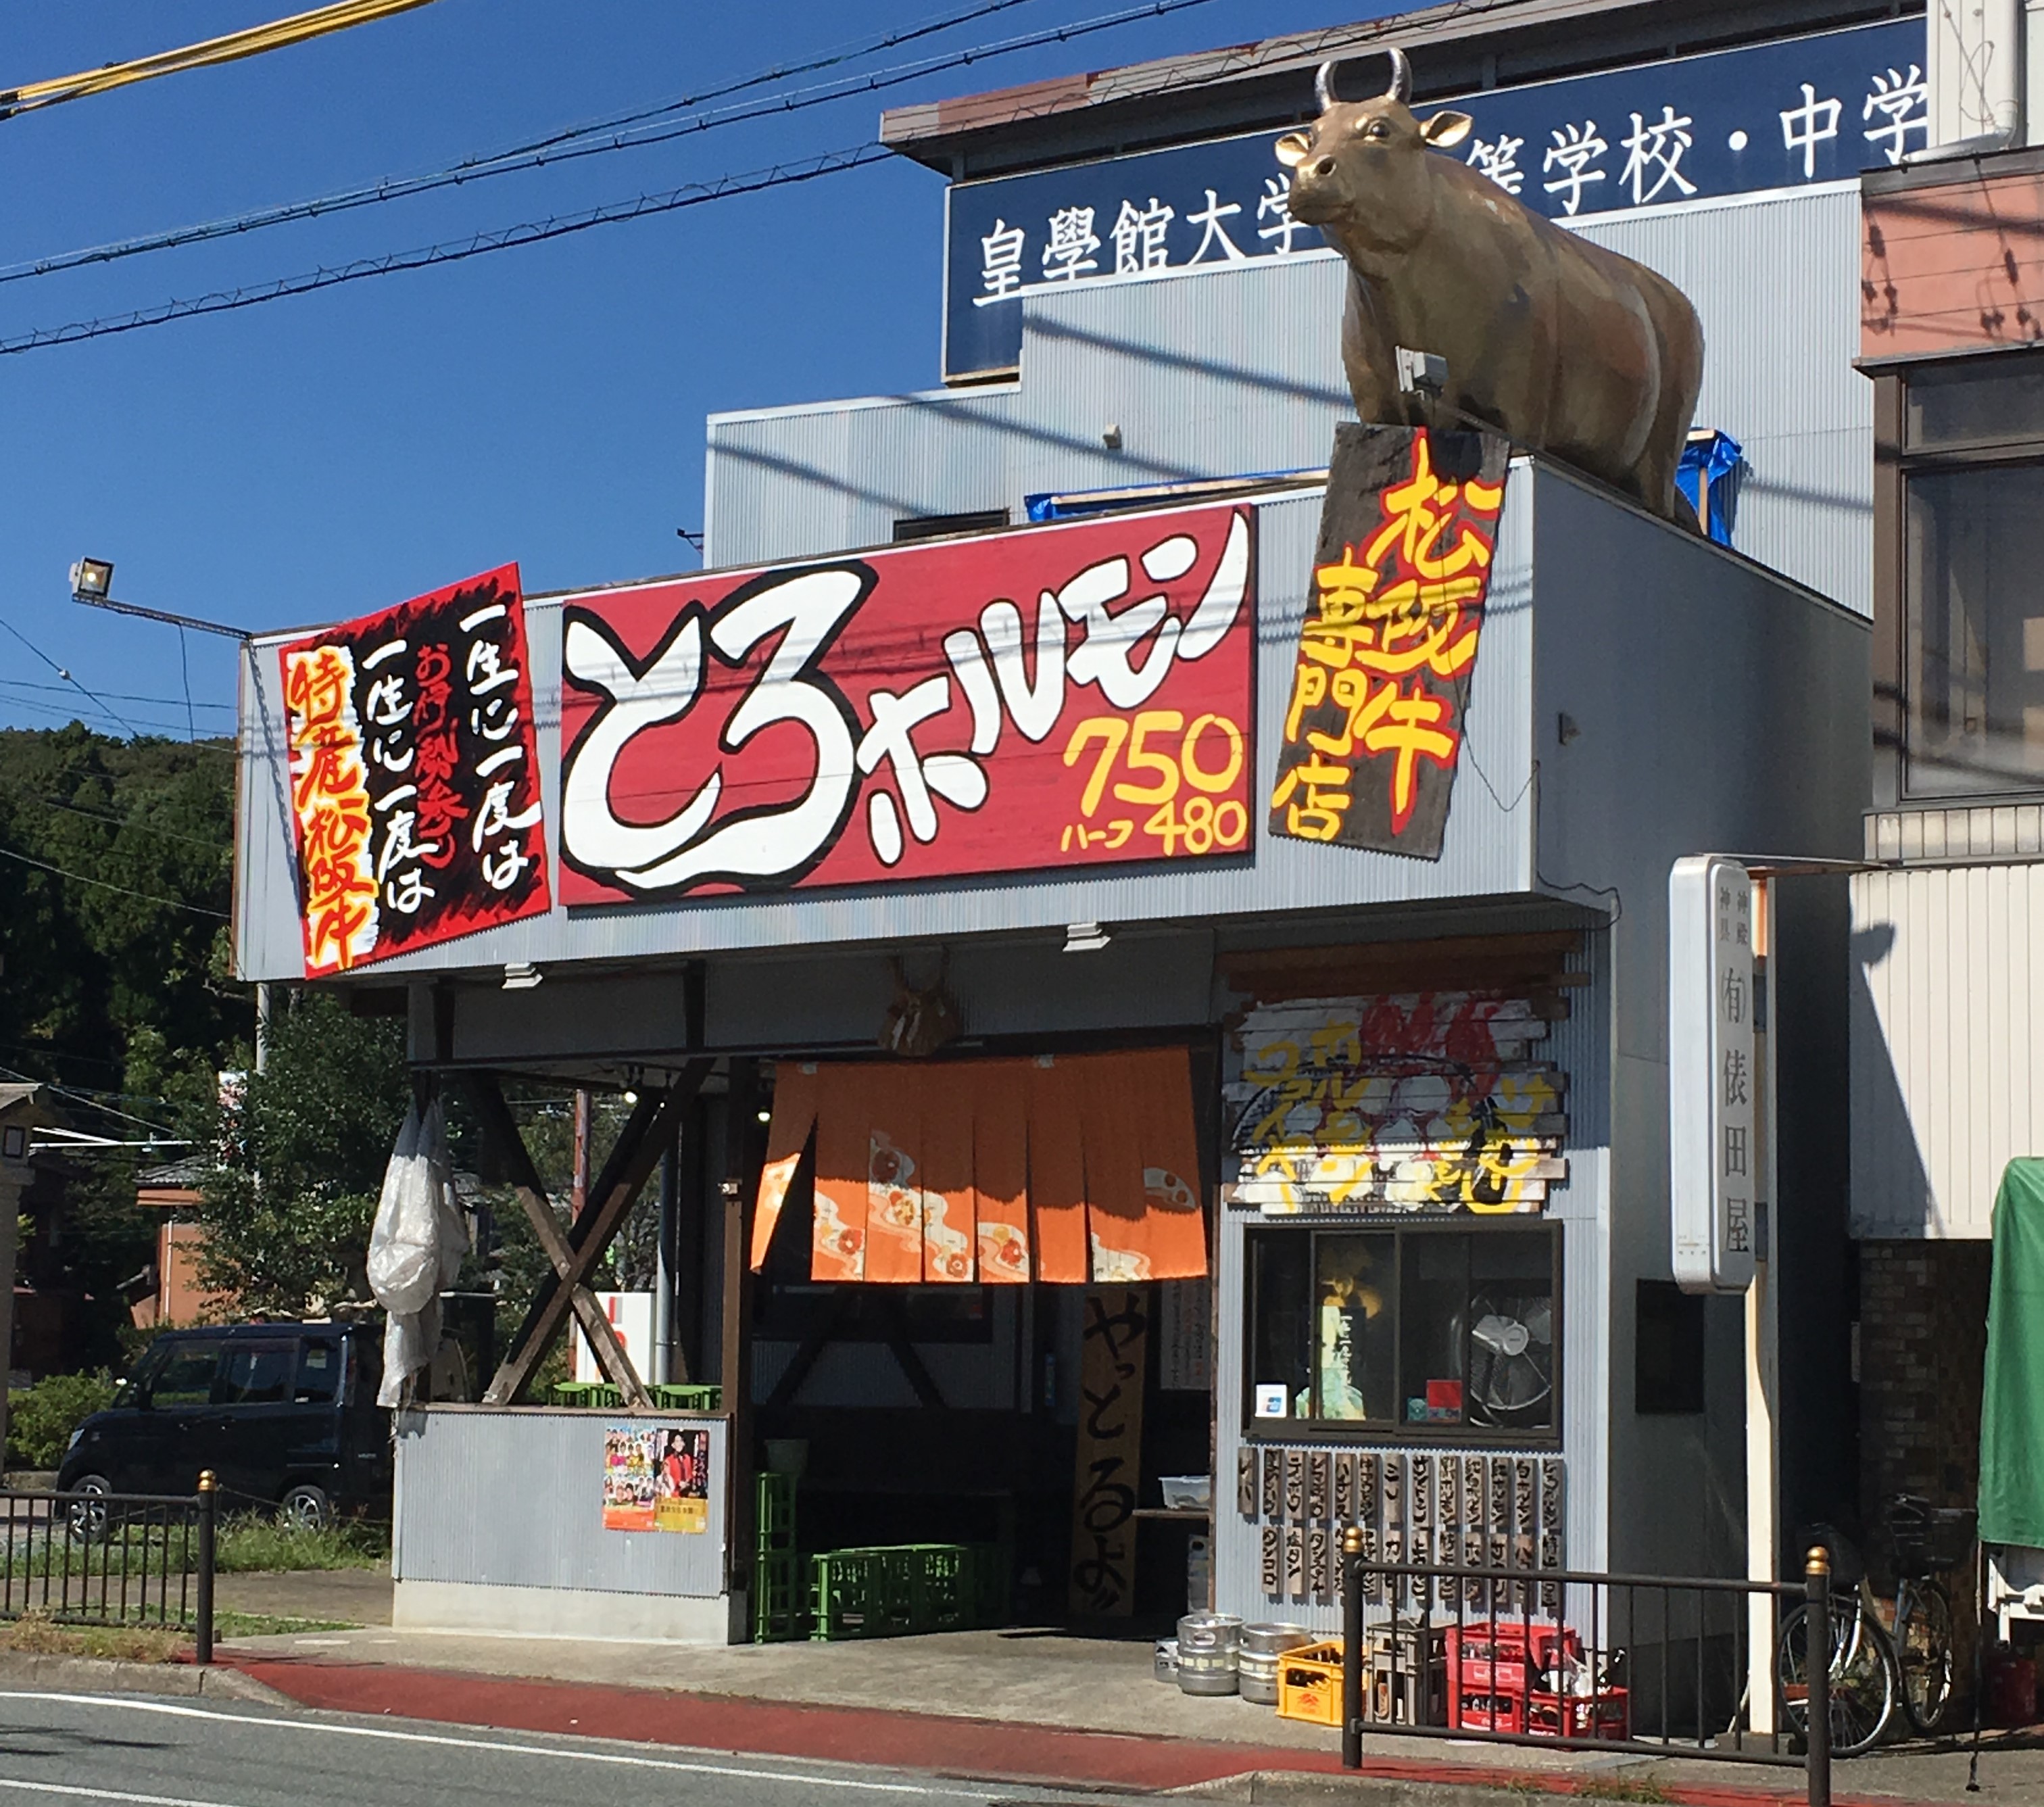 Japanese beef restaurant with golden cow on the roof